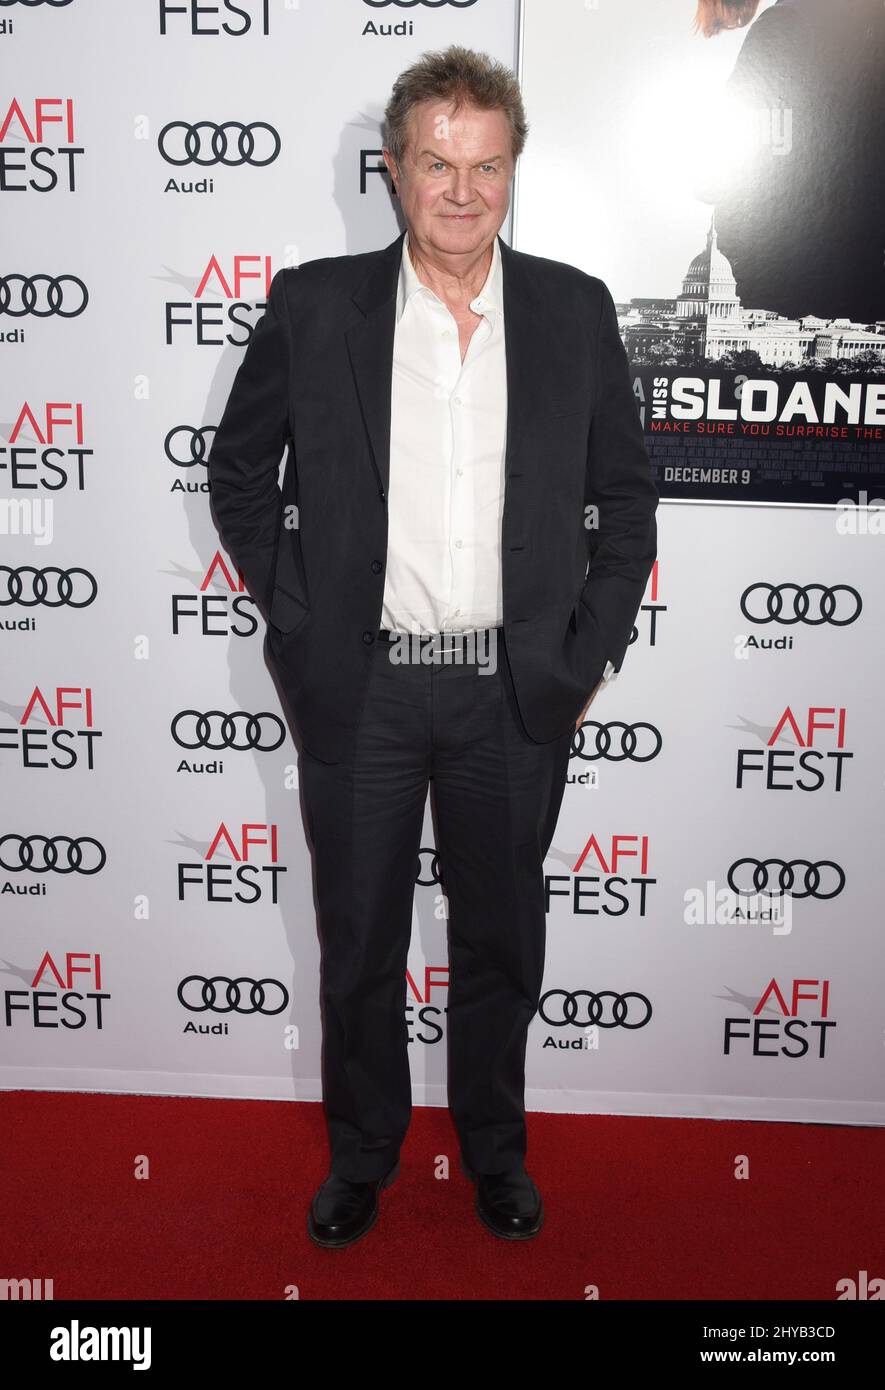 John Madden AFI FEST 2016 'Miss Sloane' World Premiere Special Screening held at the TCL Chinese 6 Theatres Stock Photo